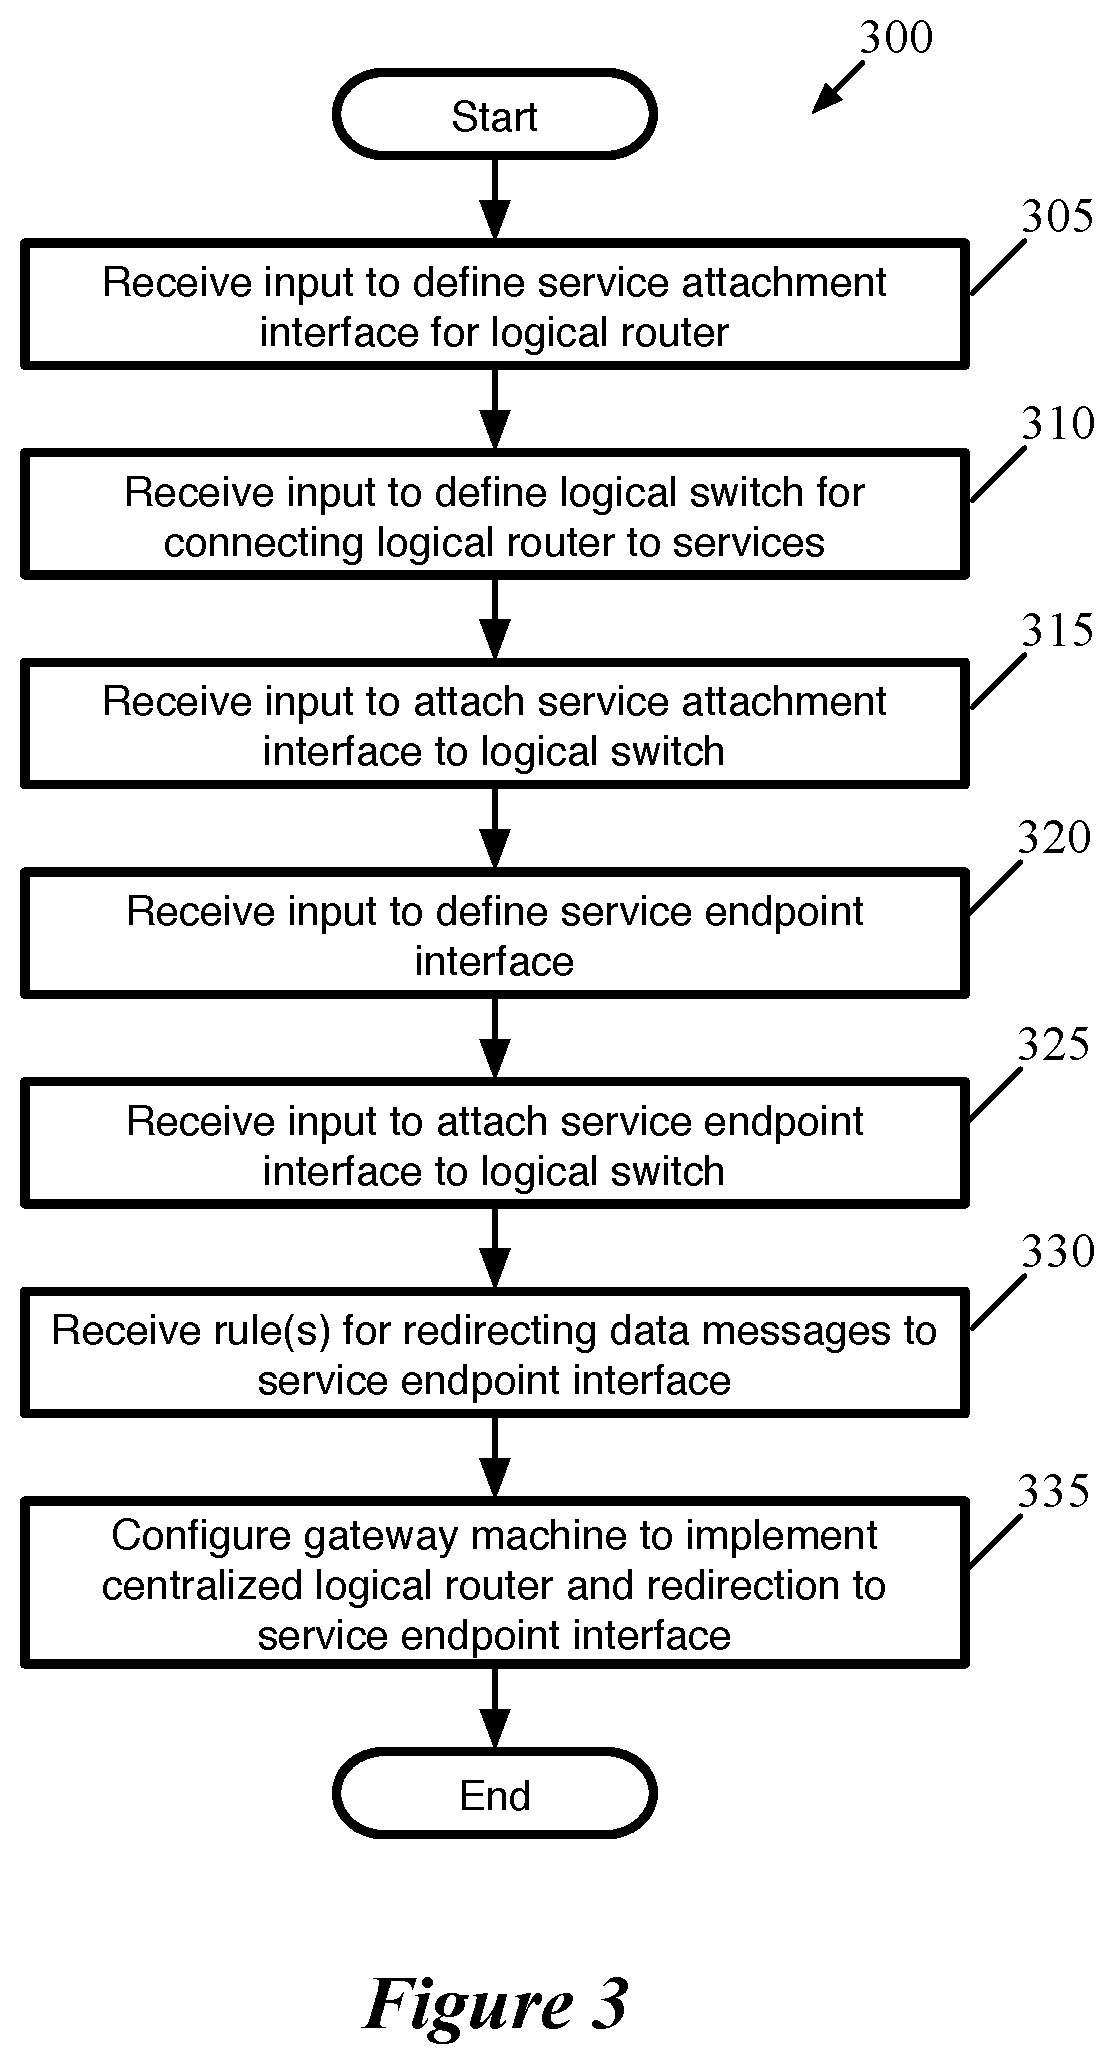 Service insertion at logical network gateway